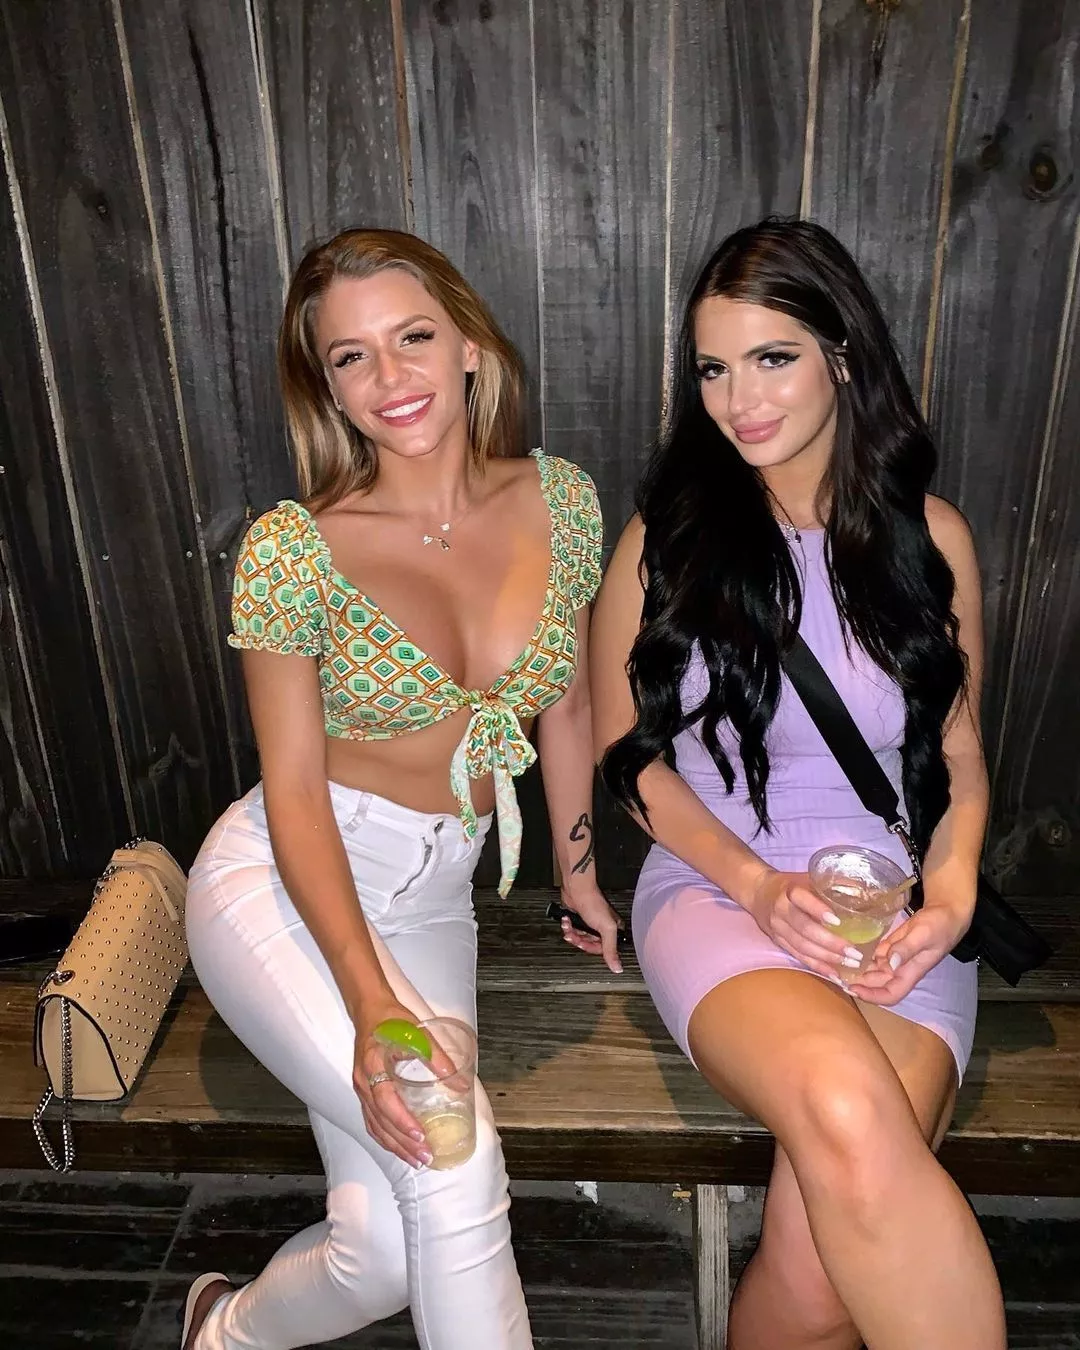 Evelyn Payne and Alexa Payne, texas, website, dallas, new, latest, full, leaked, marriage, boyfriend, thighs, tattoo, cleavage, ass, back, butt, bj, insta, wikipedia, biography